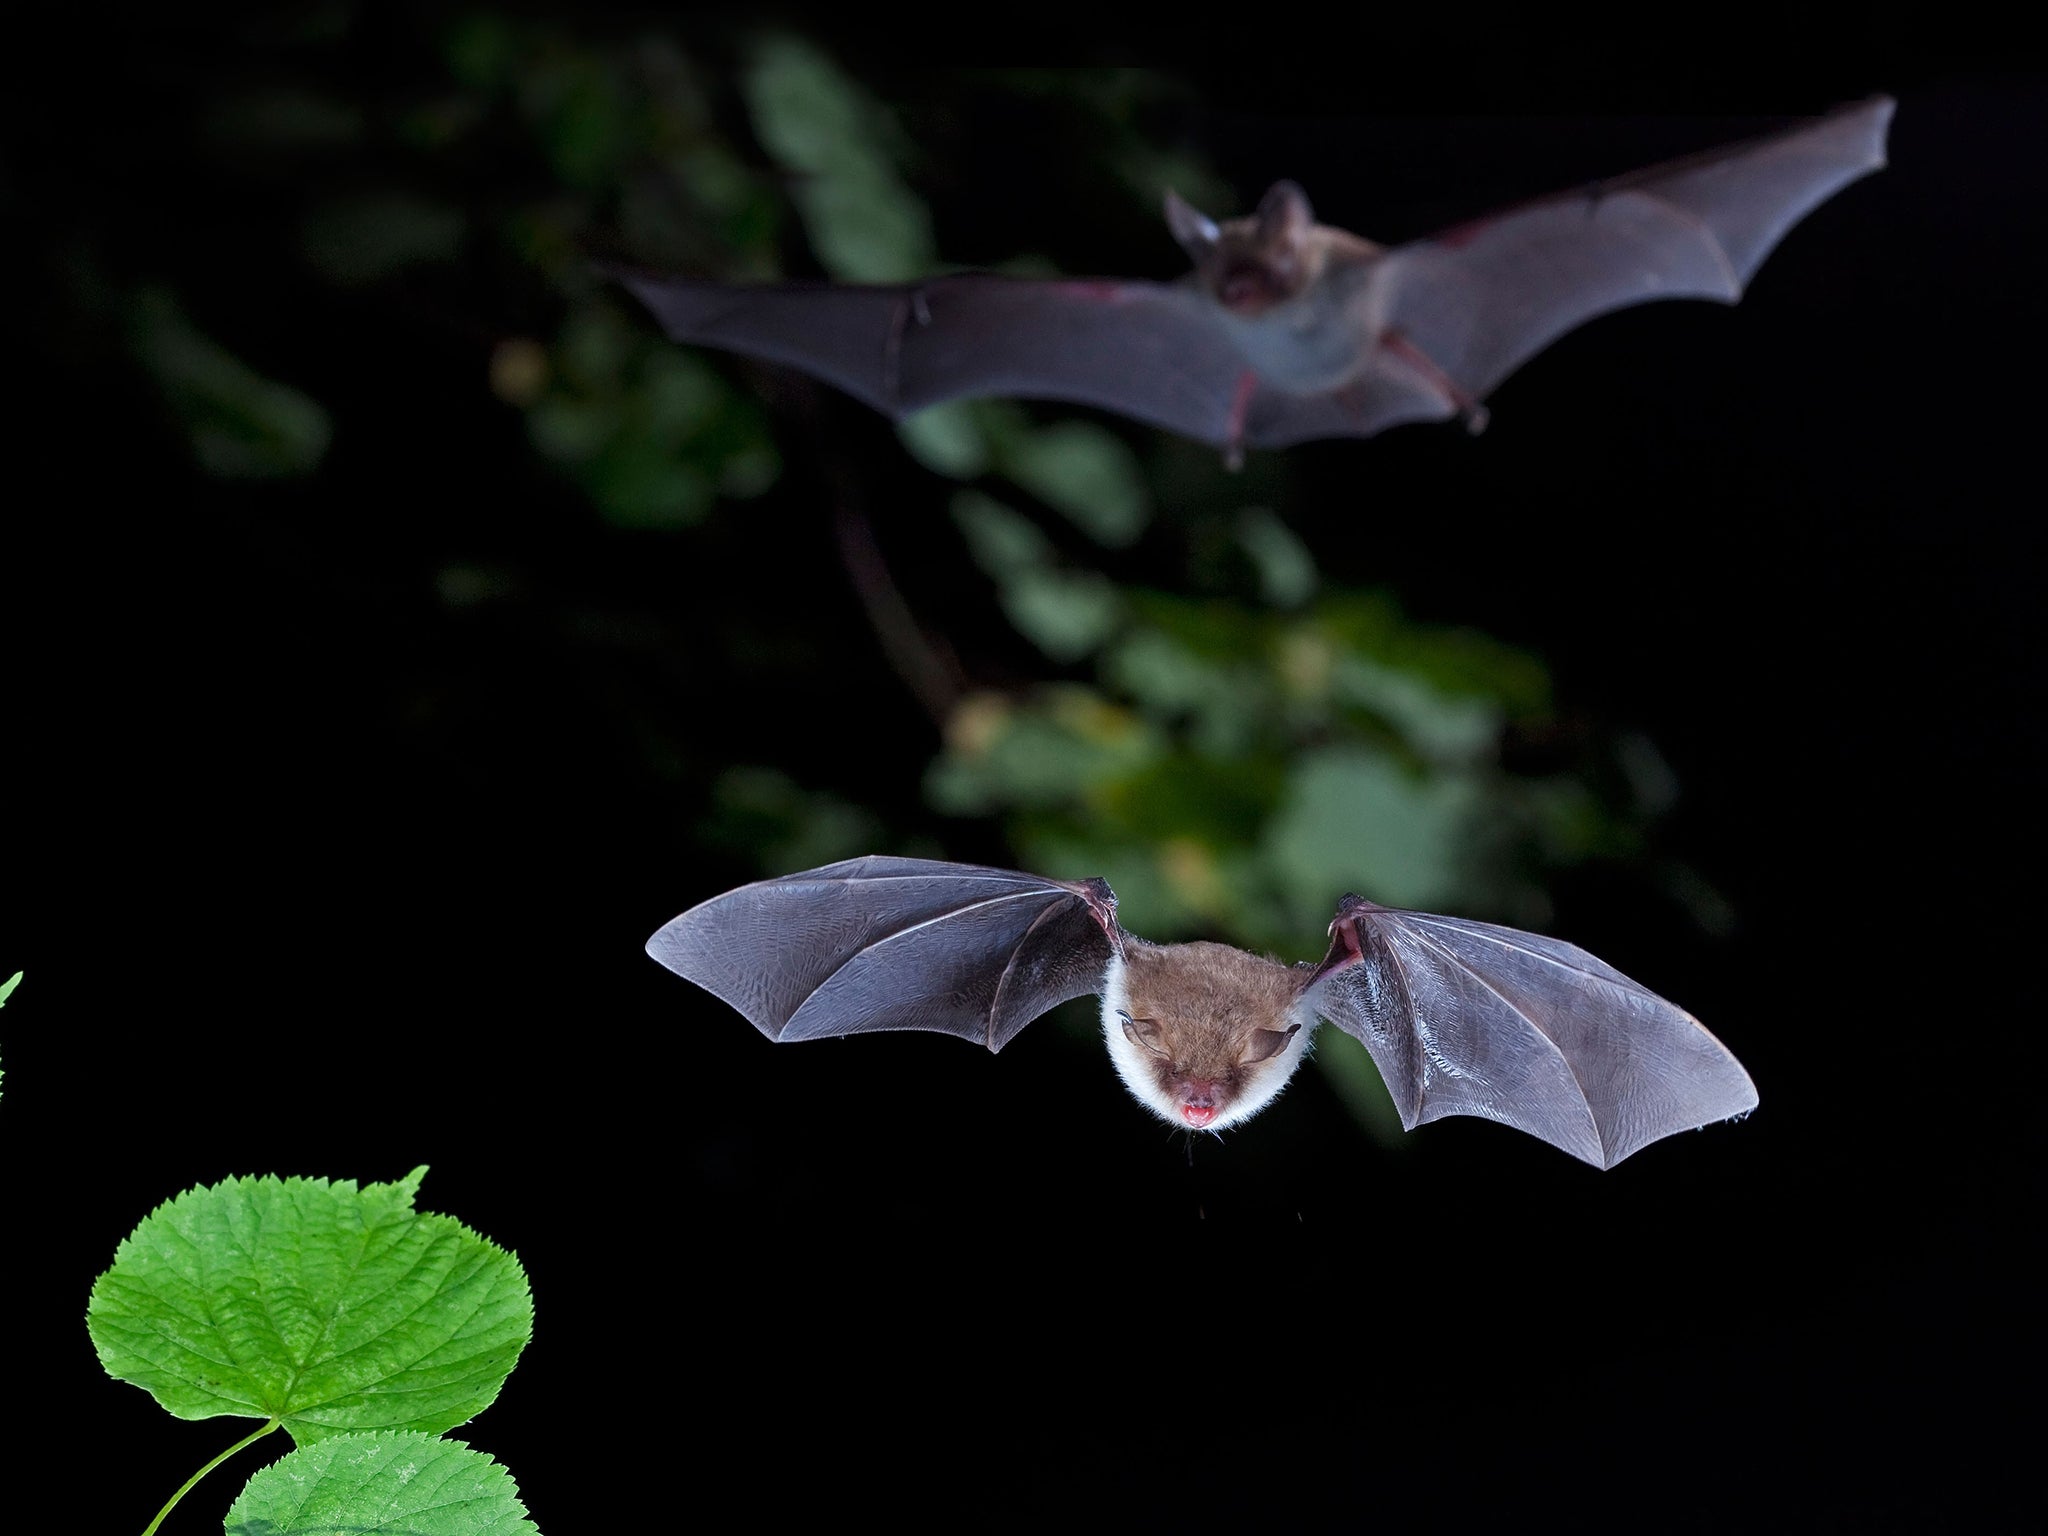 Natterer’s bats tend to congregate in mixed sex groups